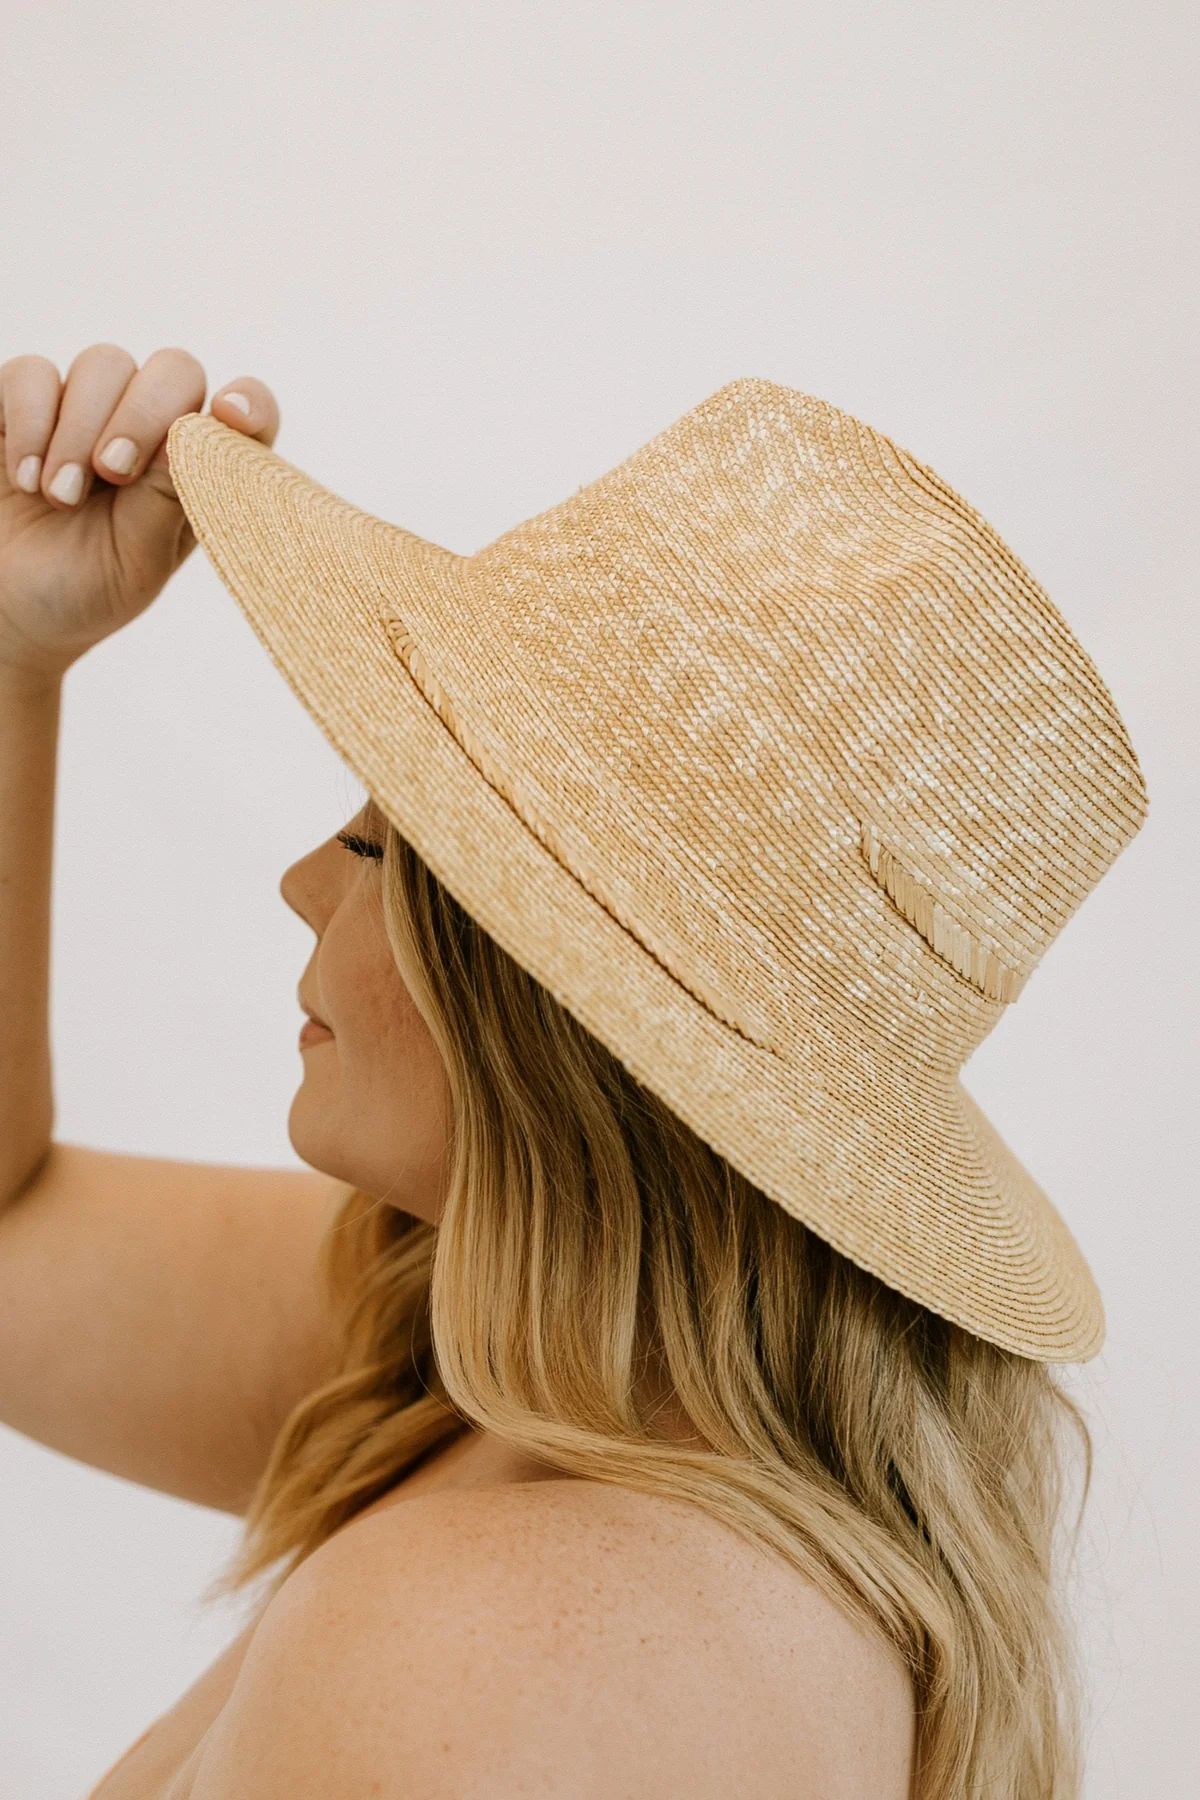 LCO Exclusive - Sienna Straw Hat | THELIFESTYLEDCO